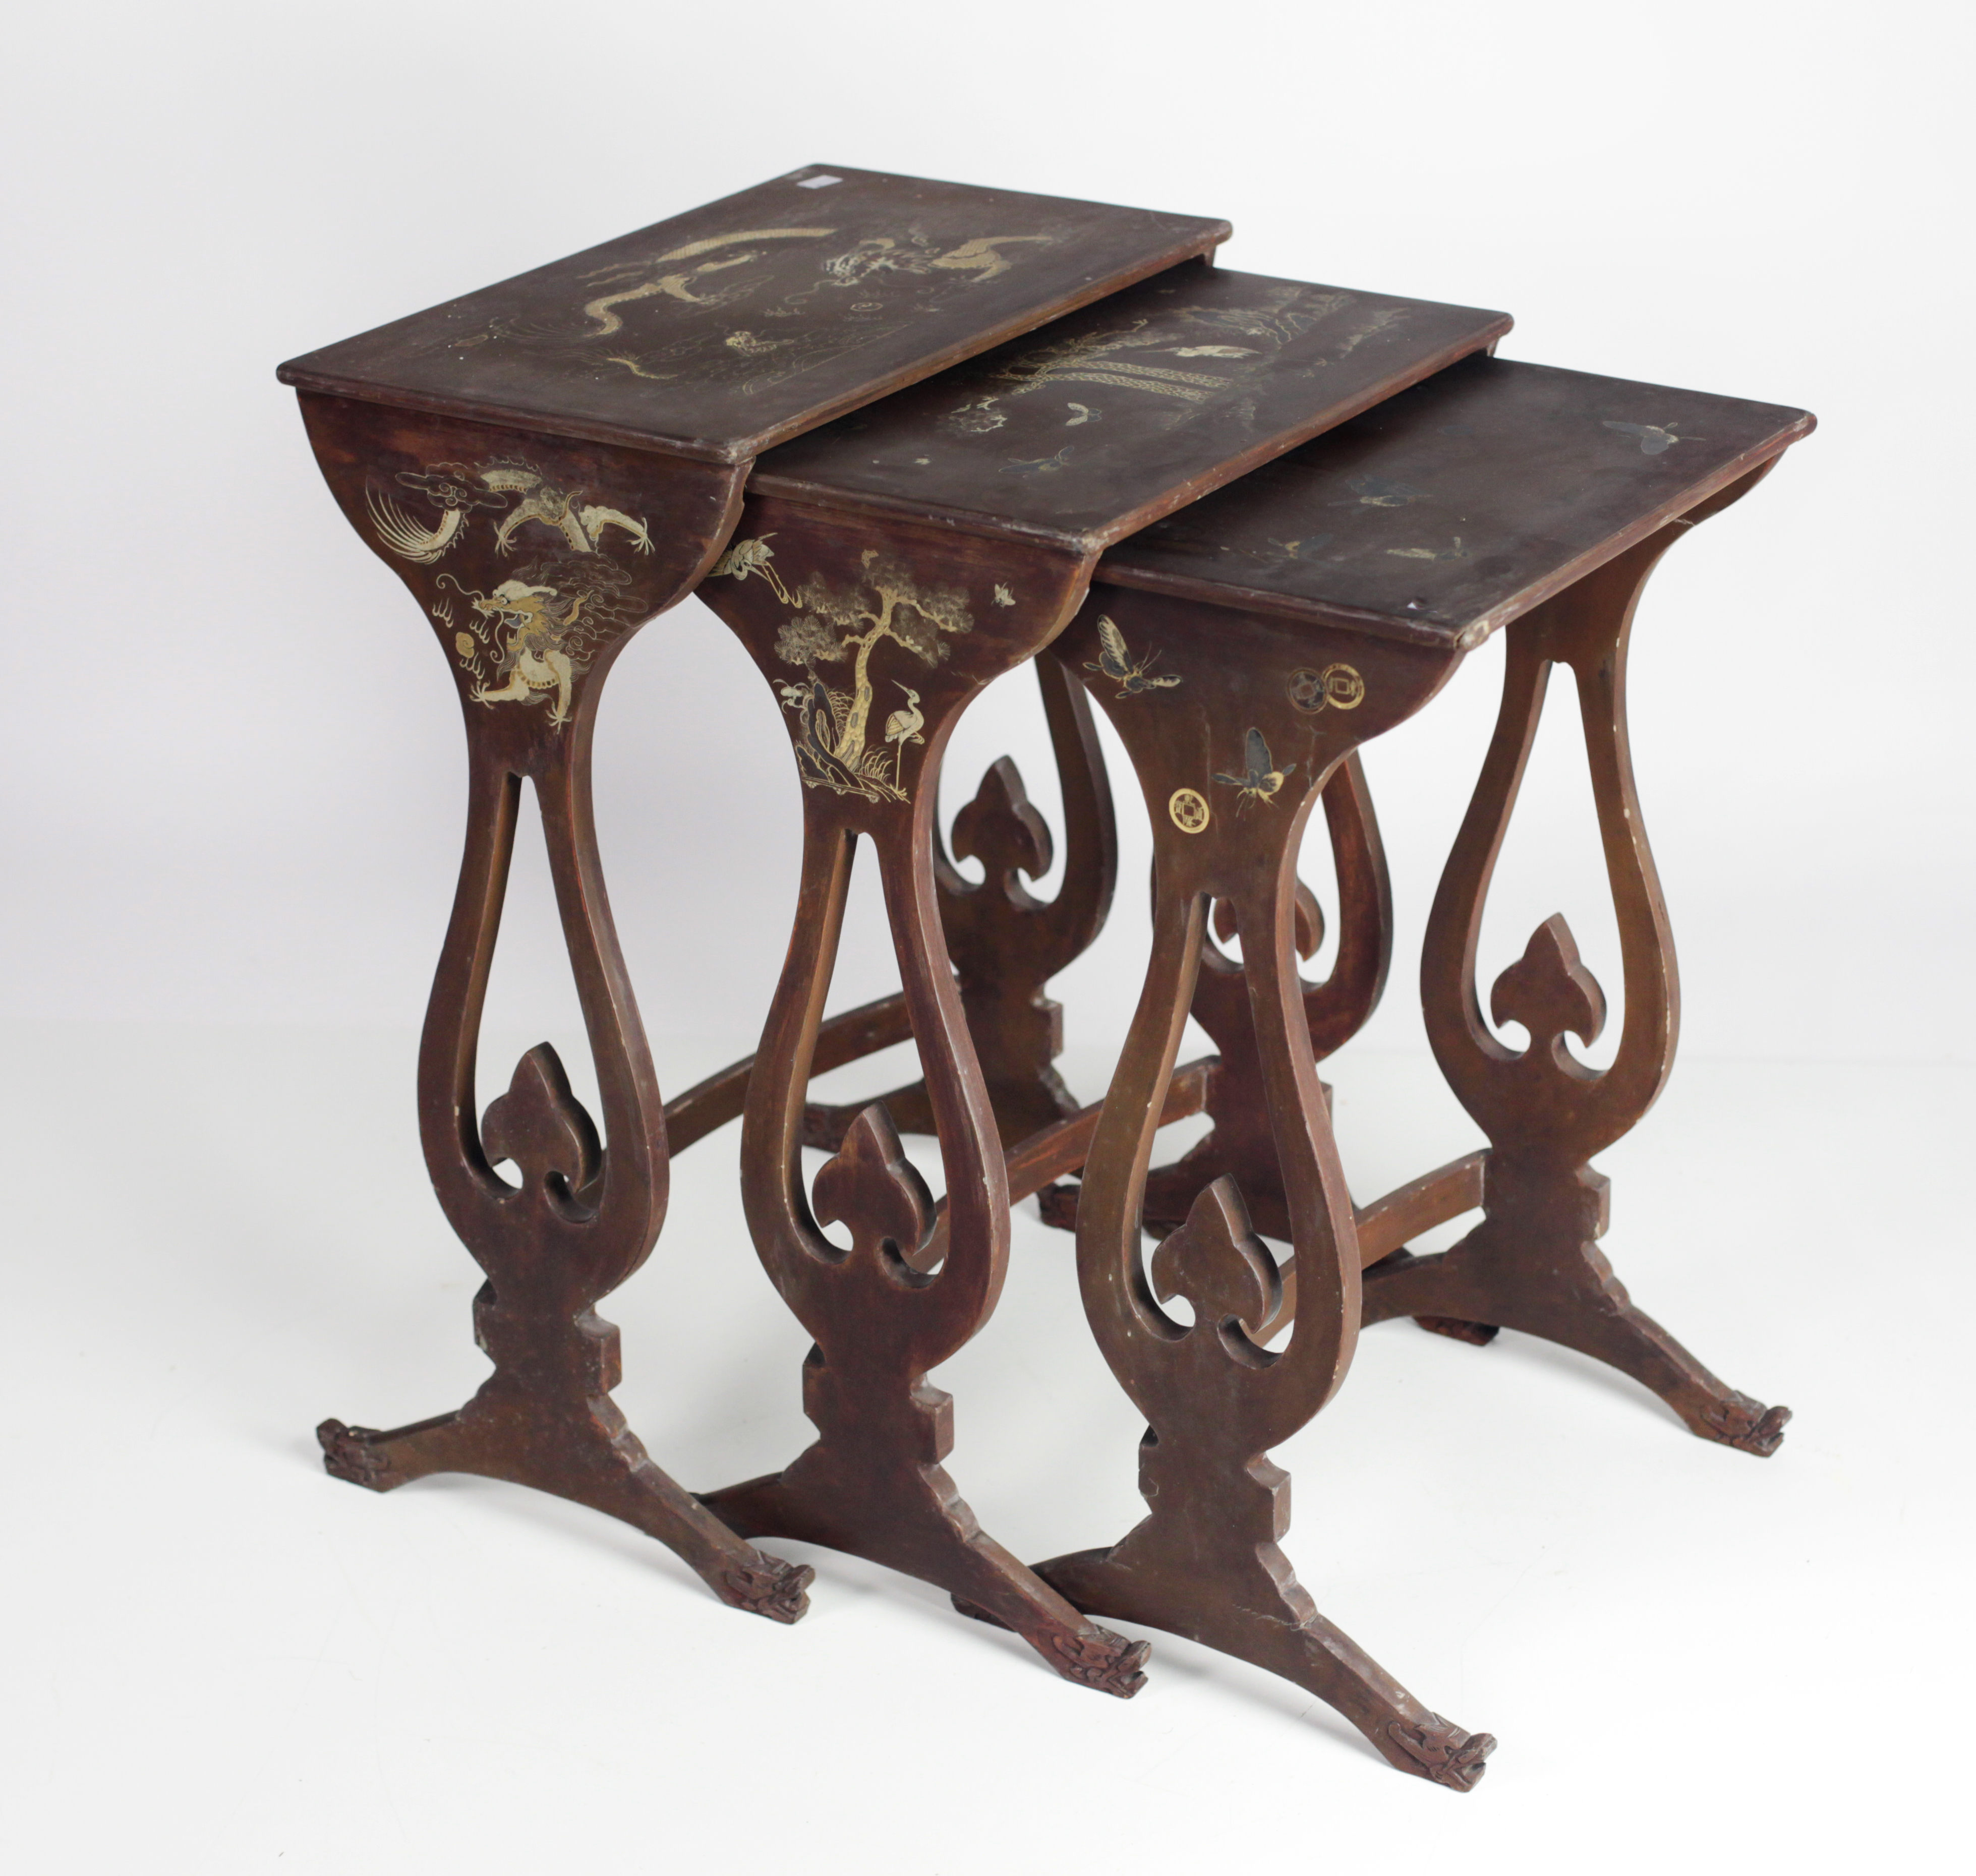 An Oriental lacquered Nest of three Tables, with gilt painted decoration and with dragon head feet.